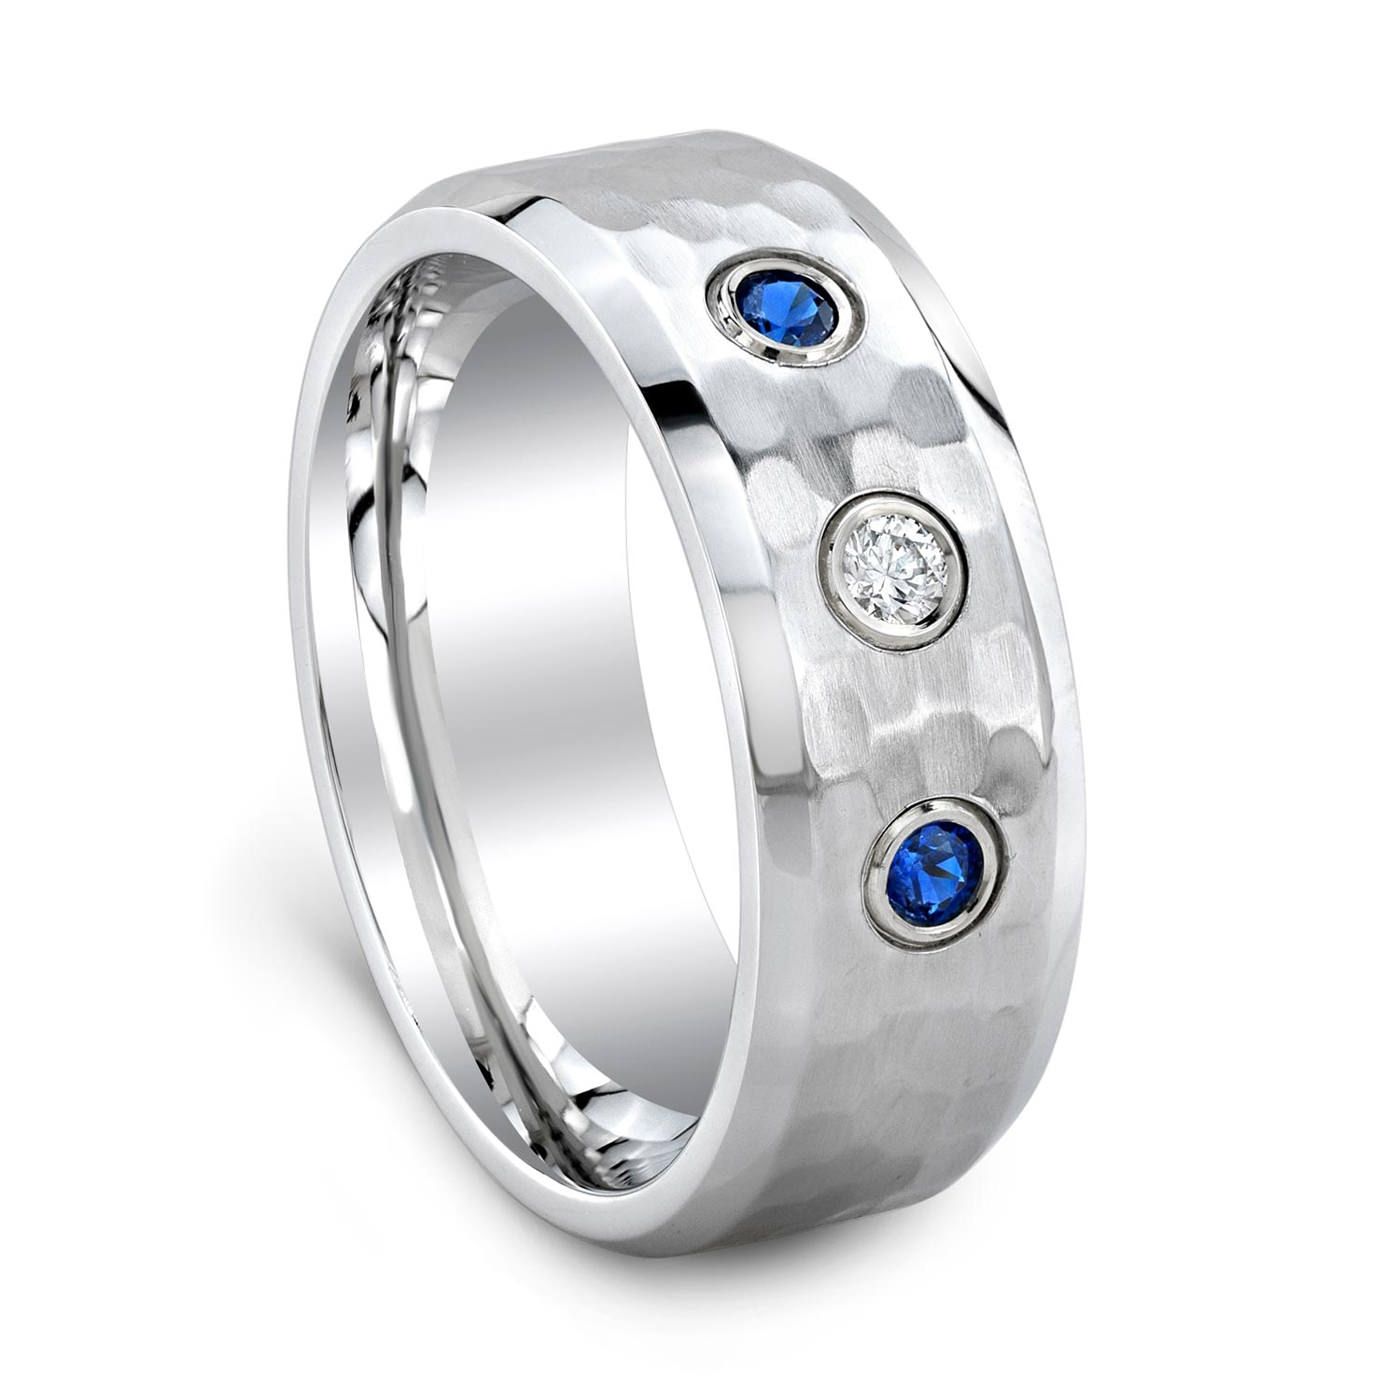 Customizable Mens 3 Stone Ring – Design Your Own Mans Ring Throughout Current Diamond Cobalt Three Stone Hammered Rings (View 4 of 15)